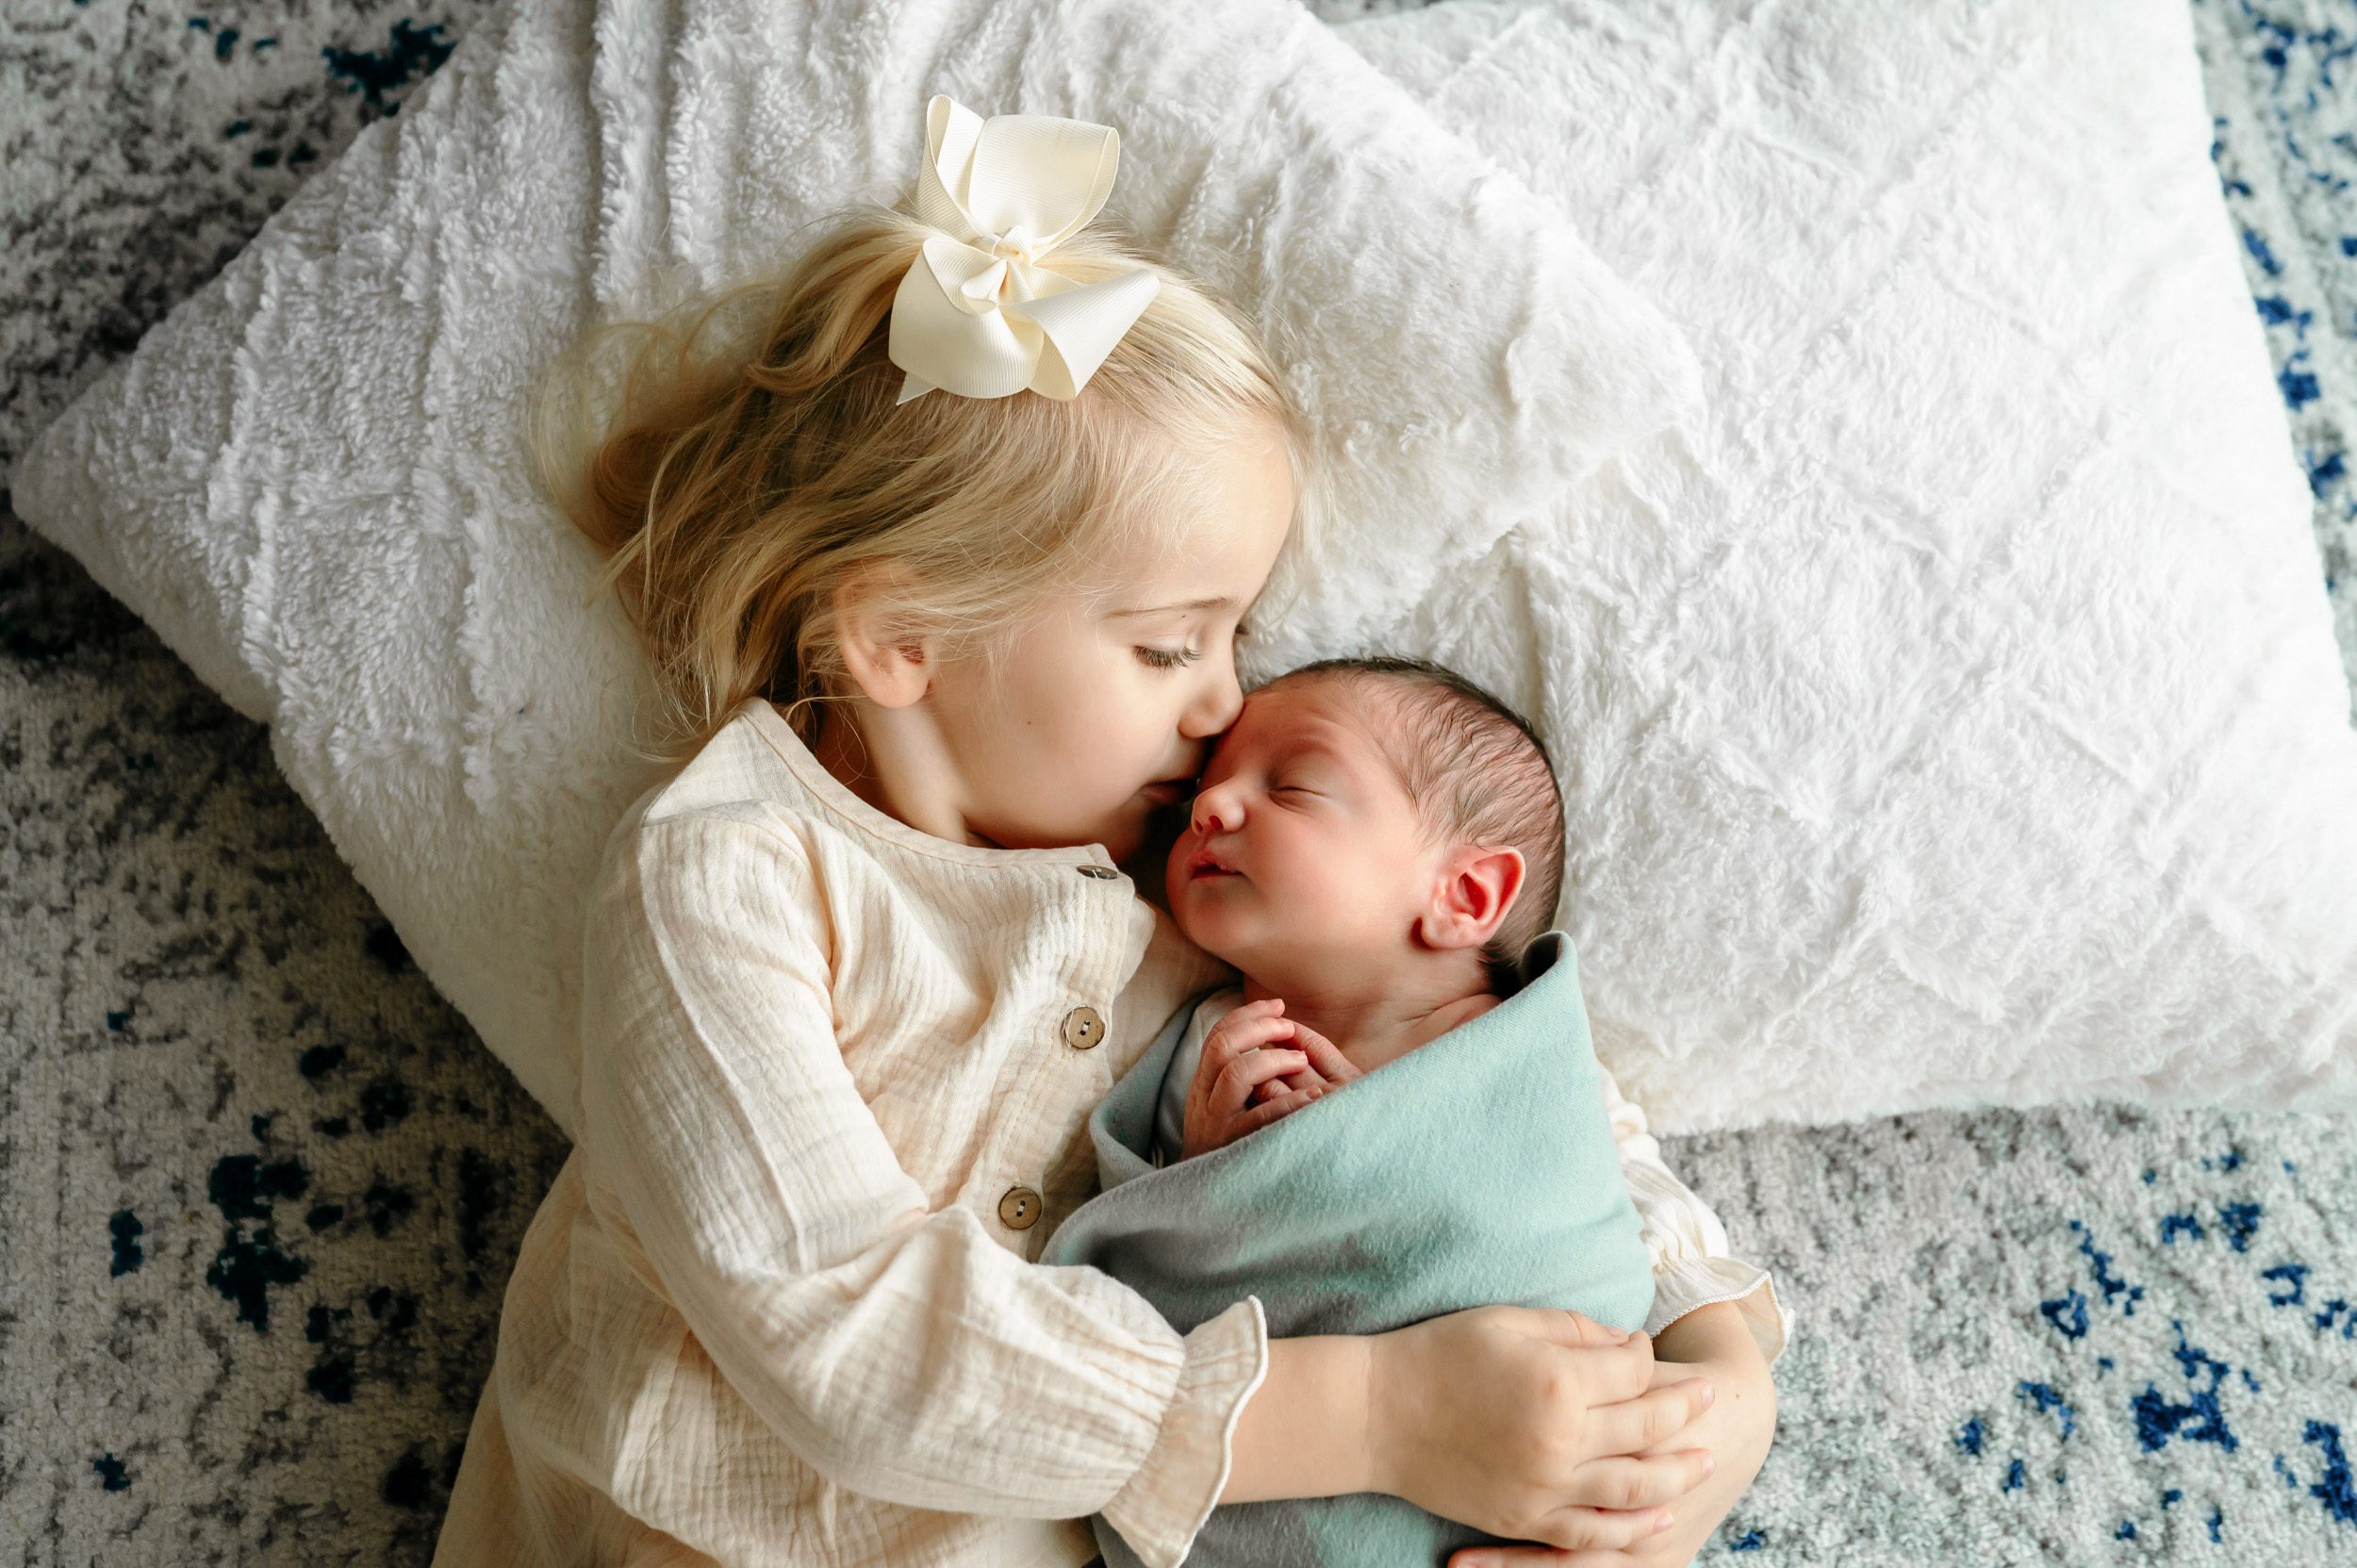 Older sister laying on pillows kissing her newborn baby brother on the forehead during an in home newborn photoshoot